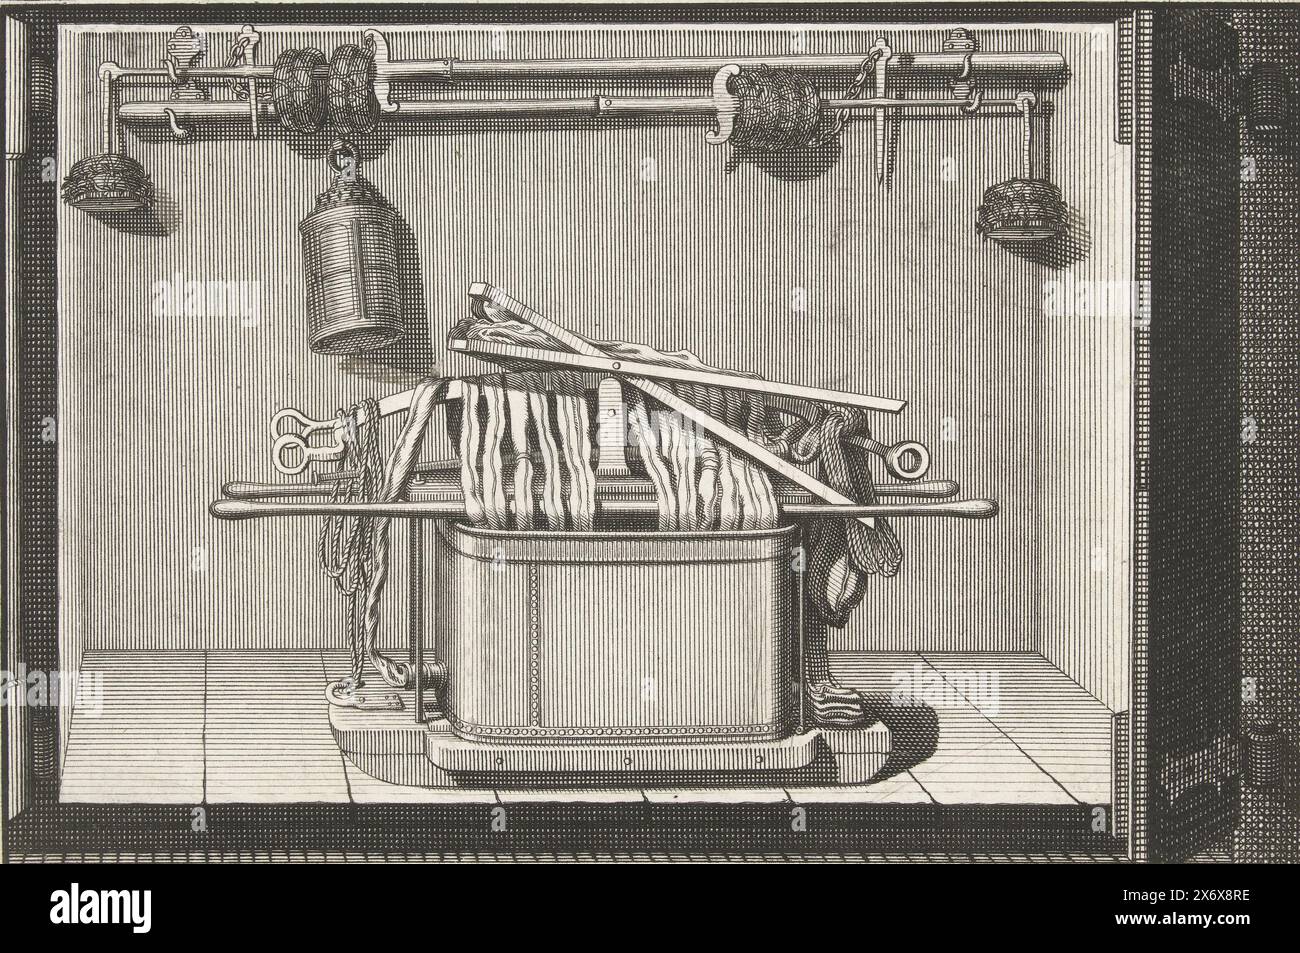 How the fire hose and pump should be stored in the fire engine house after use, approximately 1750, An illustration of how the fire hose and pump should be stored in the fire engine house after use, approximately 1750? Belongs to the supplements to the Fire Spray Book by Jan van der Heyden., print, print maker: anonymous, Northern Netherlands, 1700 - 1799, paper, etching, engraving, height, 133 mm × width, 200 mm Stock Photo